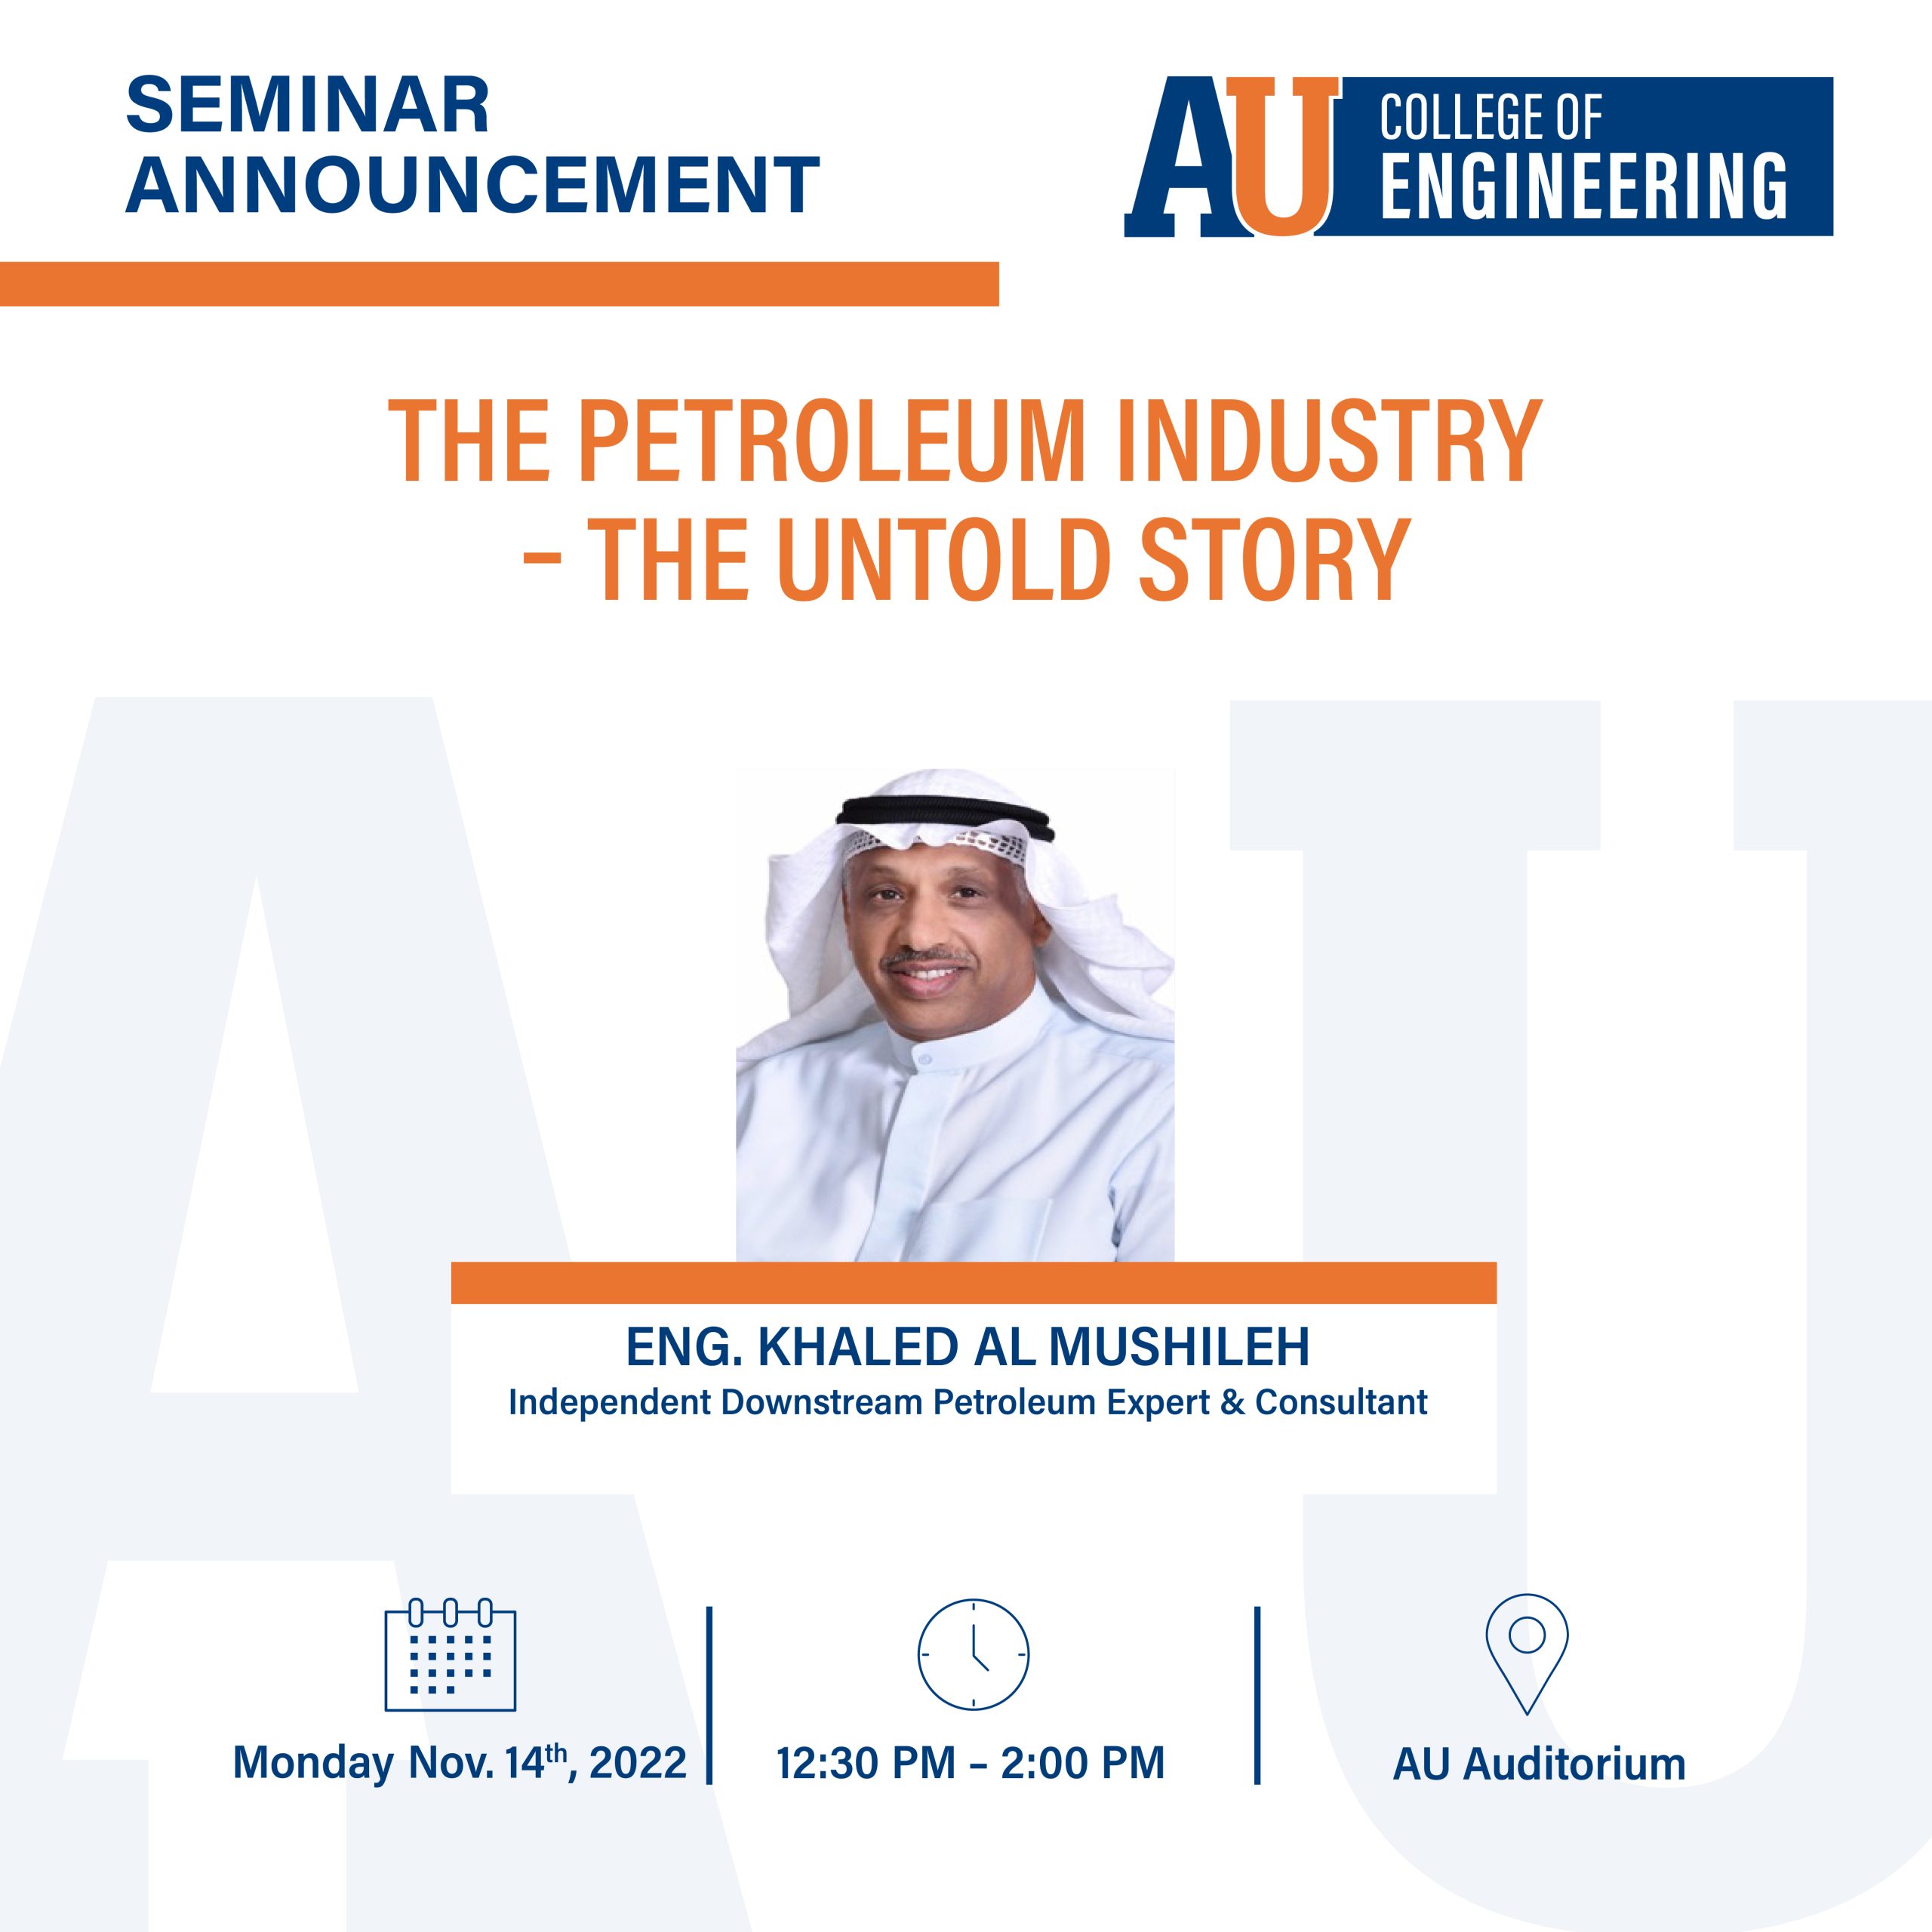 The Petroleum Industry - The Untold Story